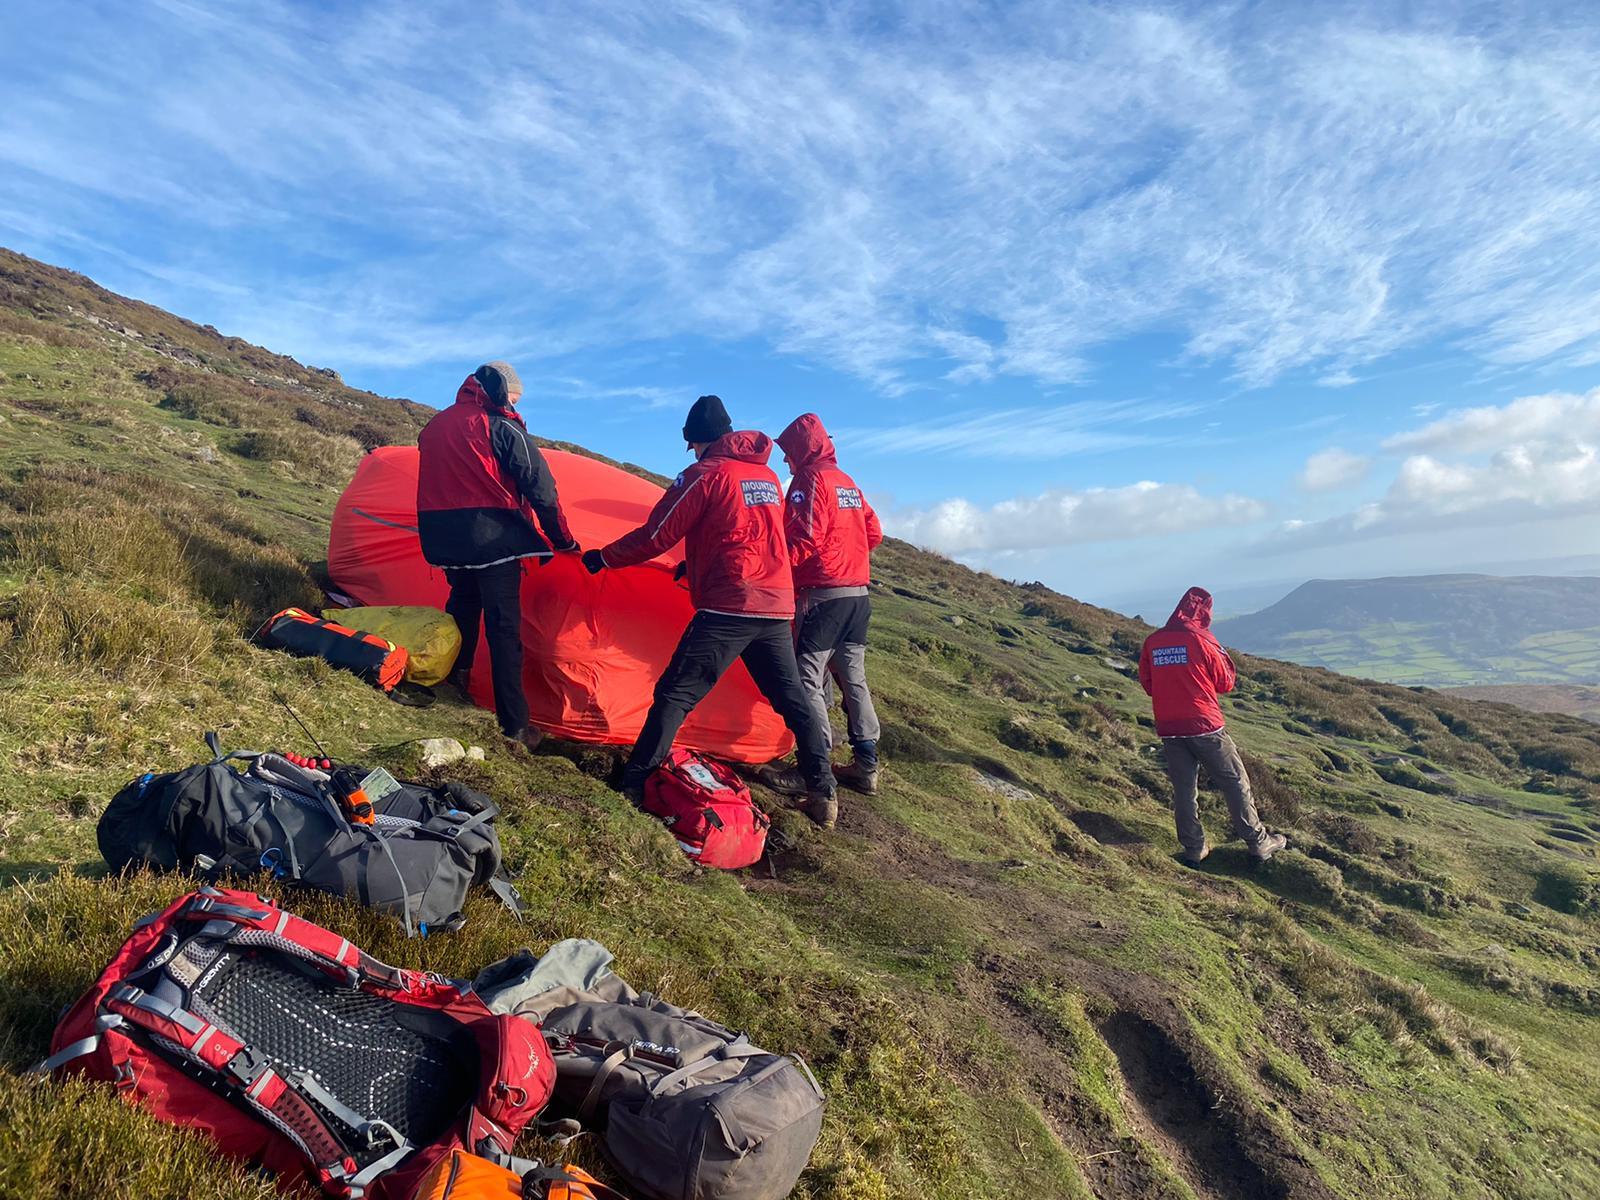 The mountain rescue team provided shelter until the woman could be carried to safety from the Sugarloaf. Picture: Longtown Mountain Rescue Team